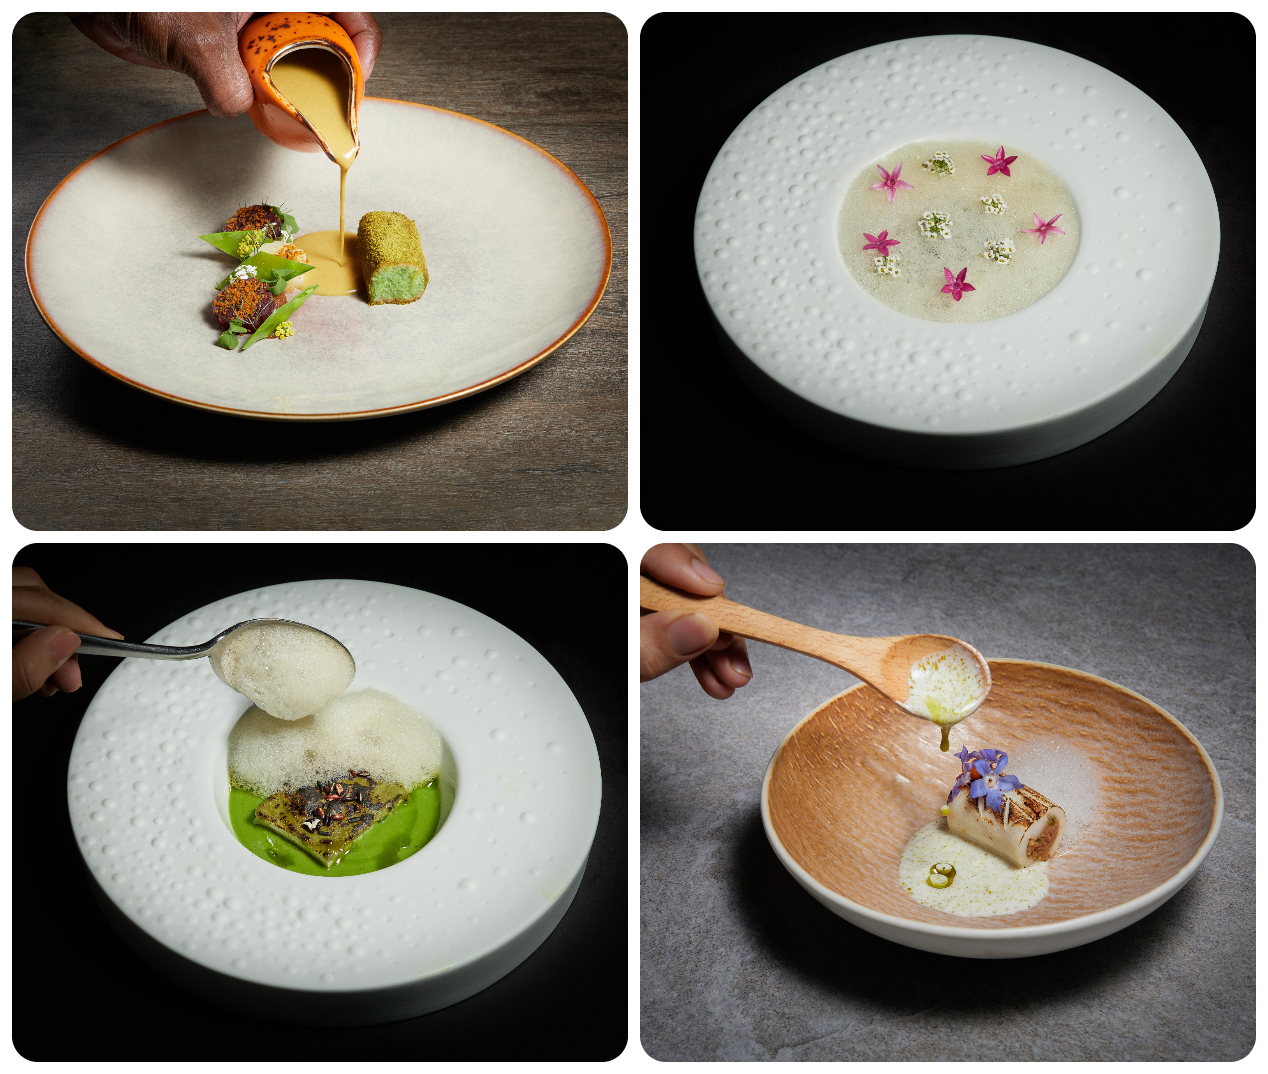 A sample of the dishes available as part of the degustation menu at Nadodi. – Pics courtesy of Nadodi